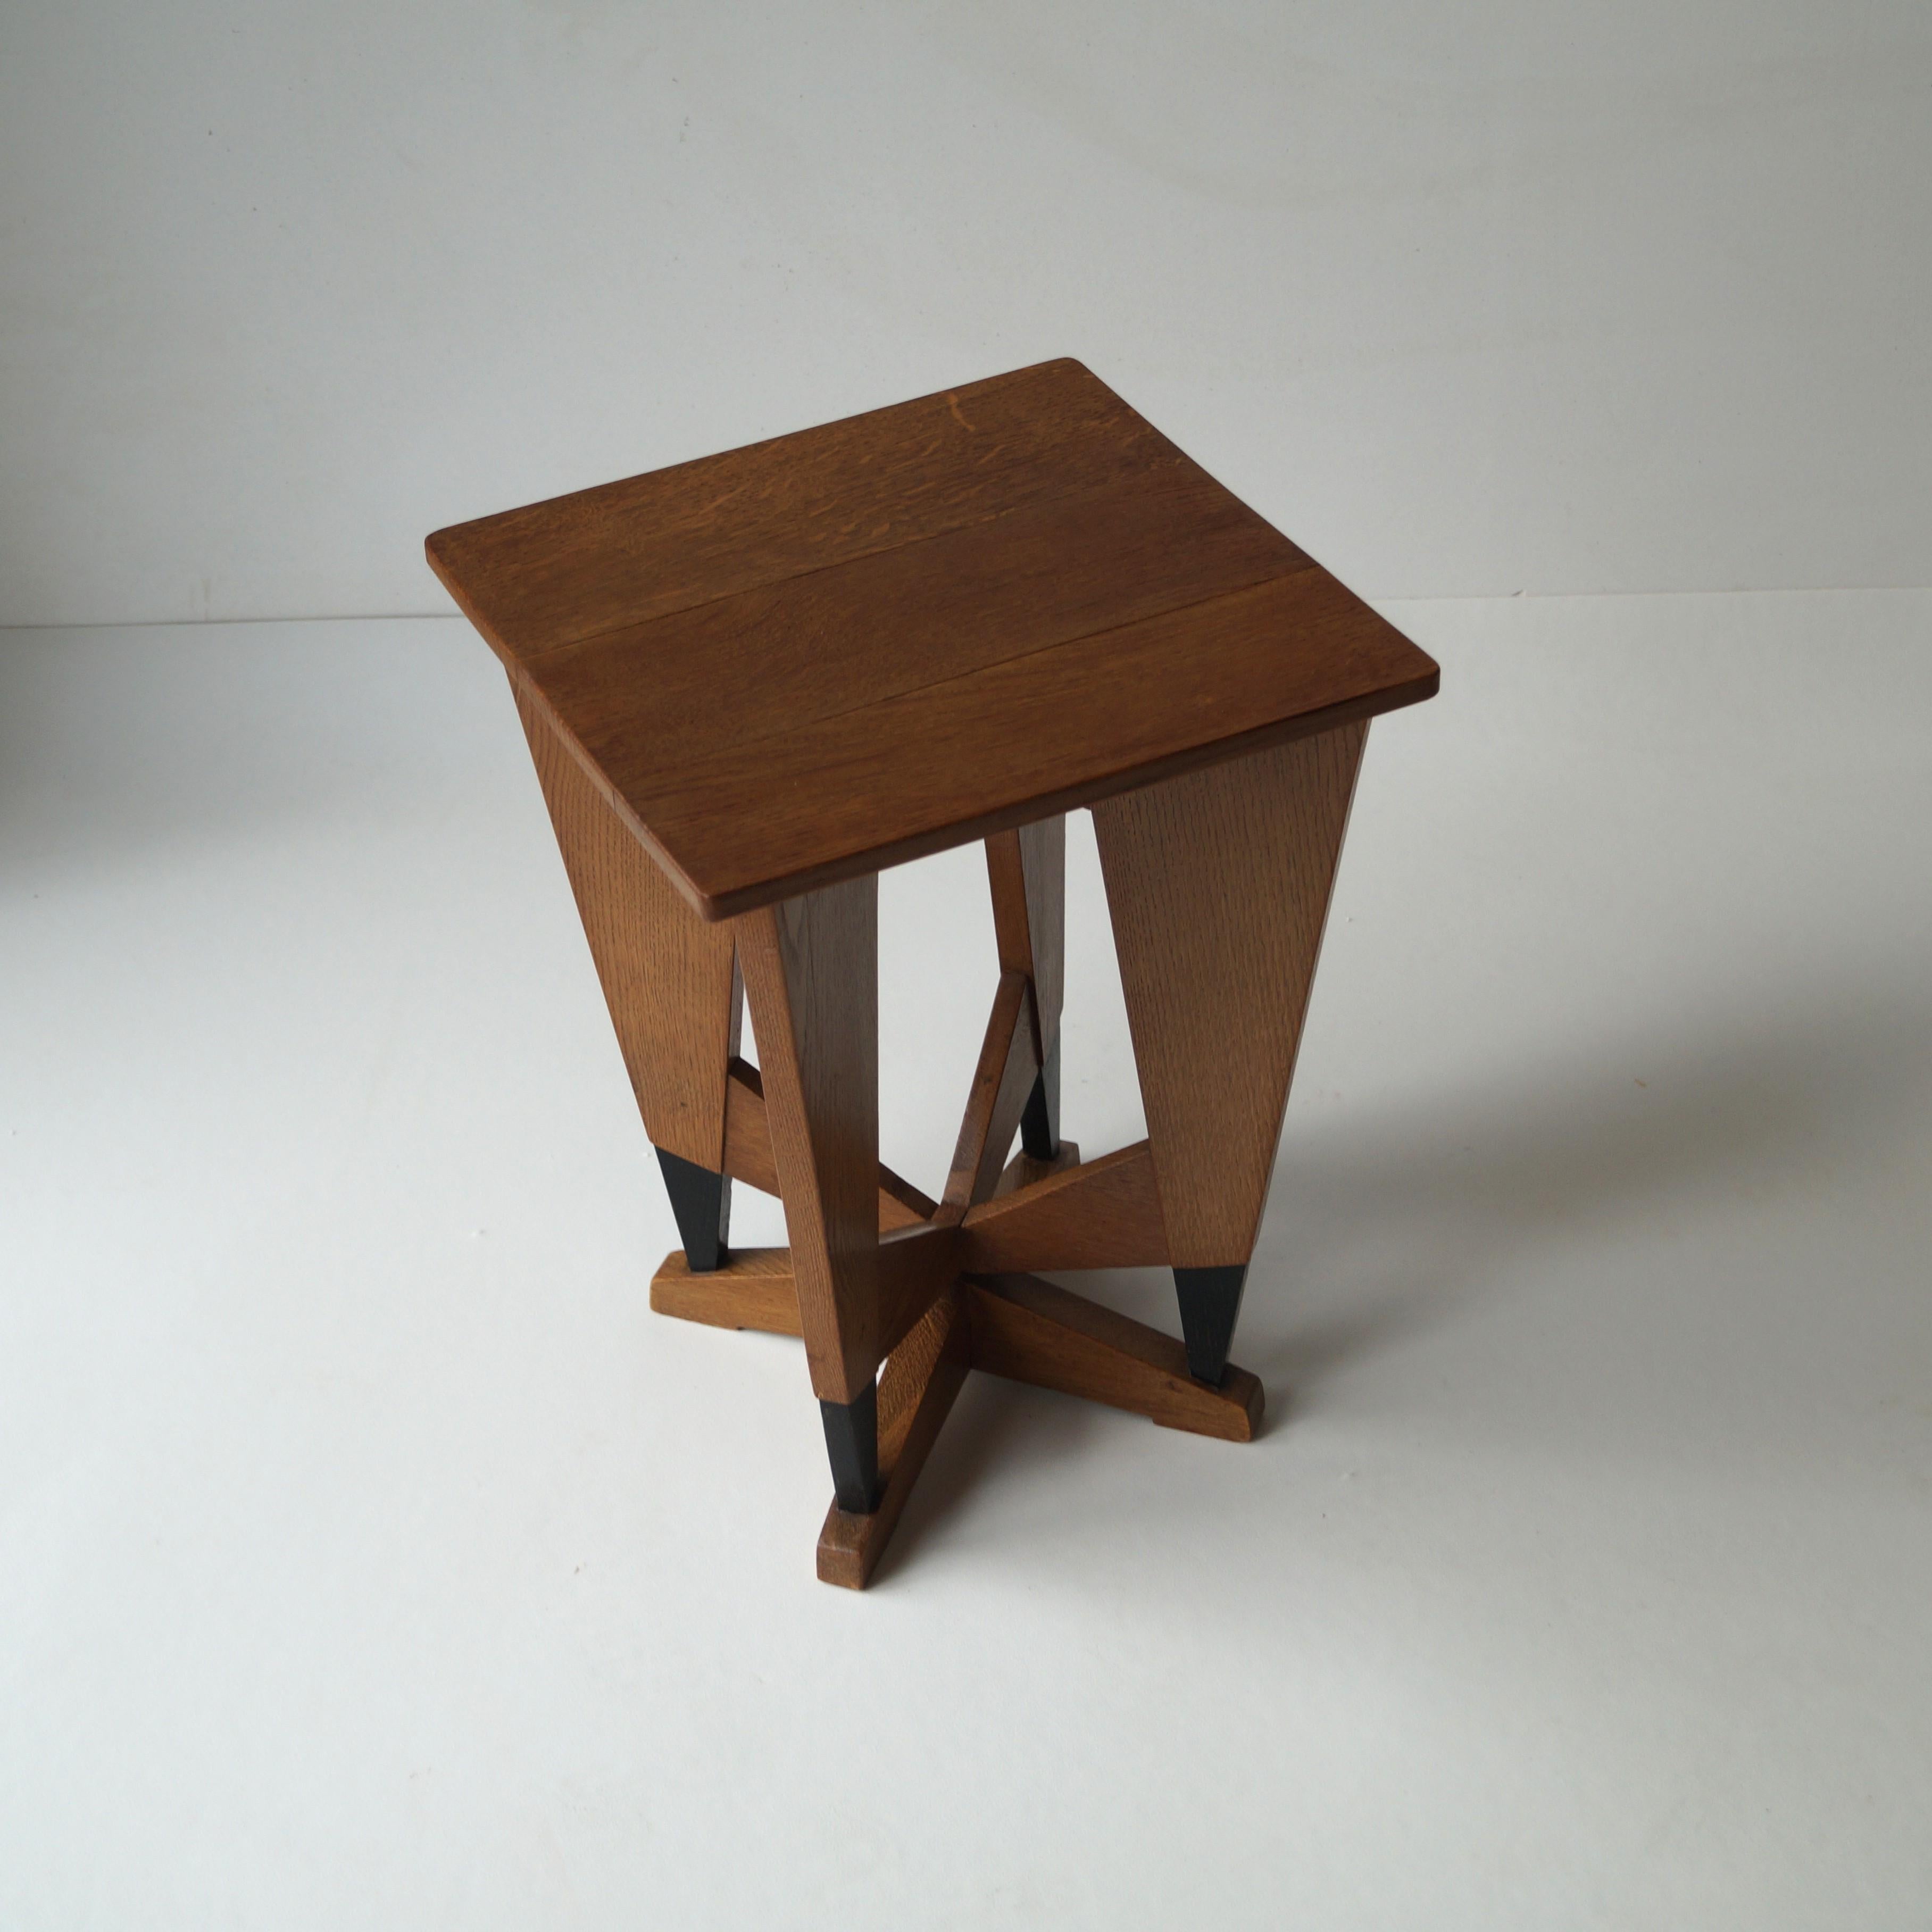 Early 20th Century Dutch Art Deco Occasional Table by P.E.L. Izeren, 1920s For Sale